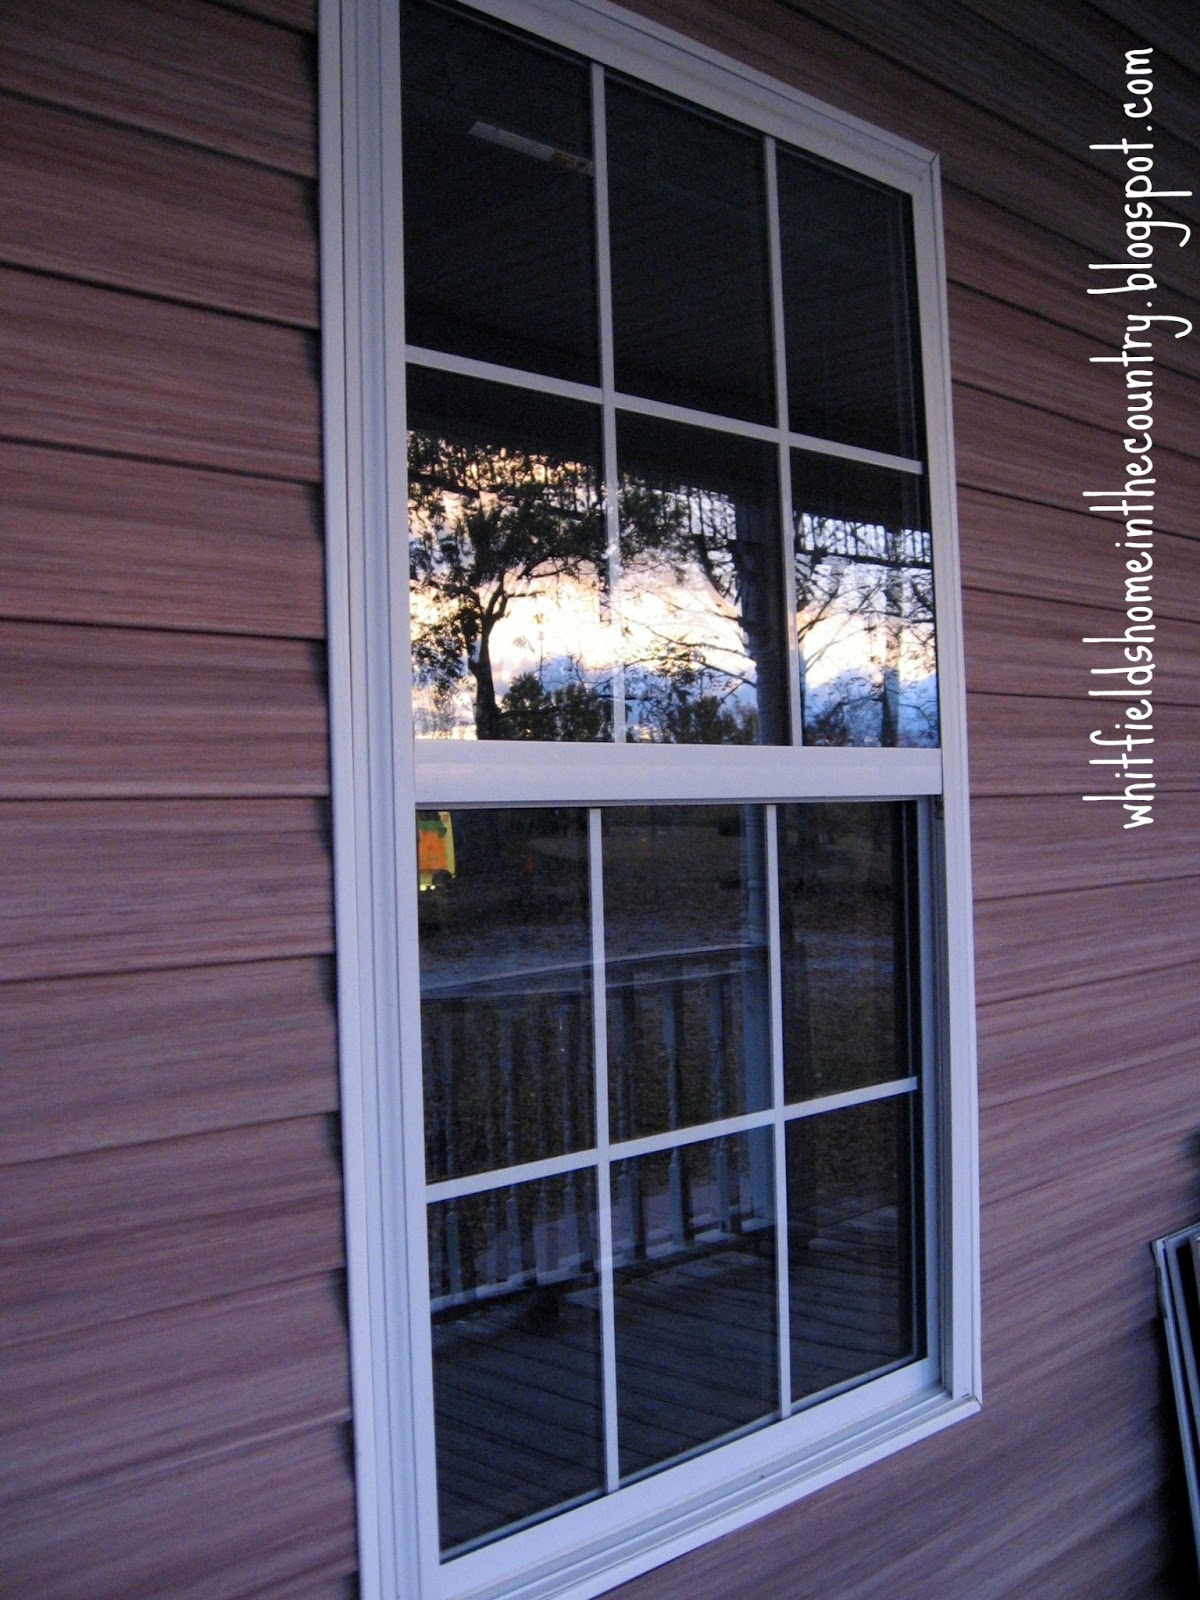 Whitfield's Home ♥ In The Country ~: Homemade Outdoor Window Cleaner